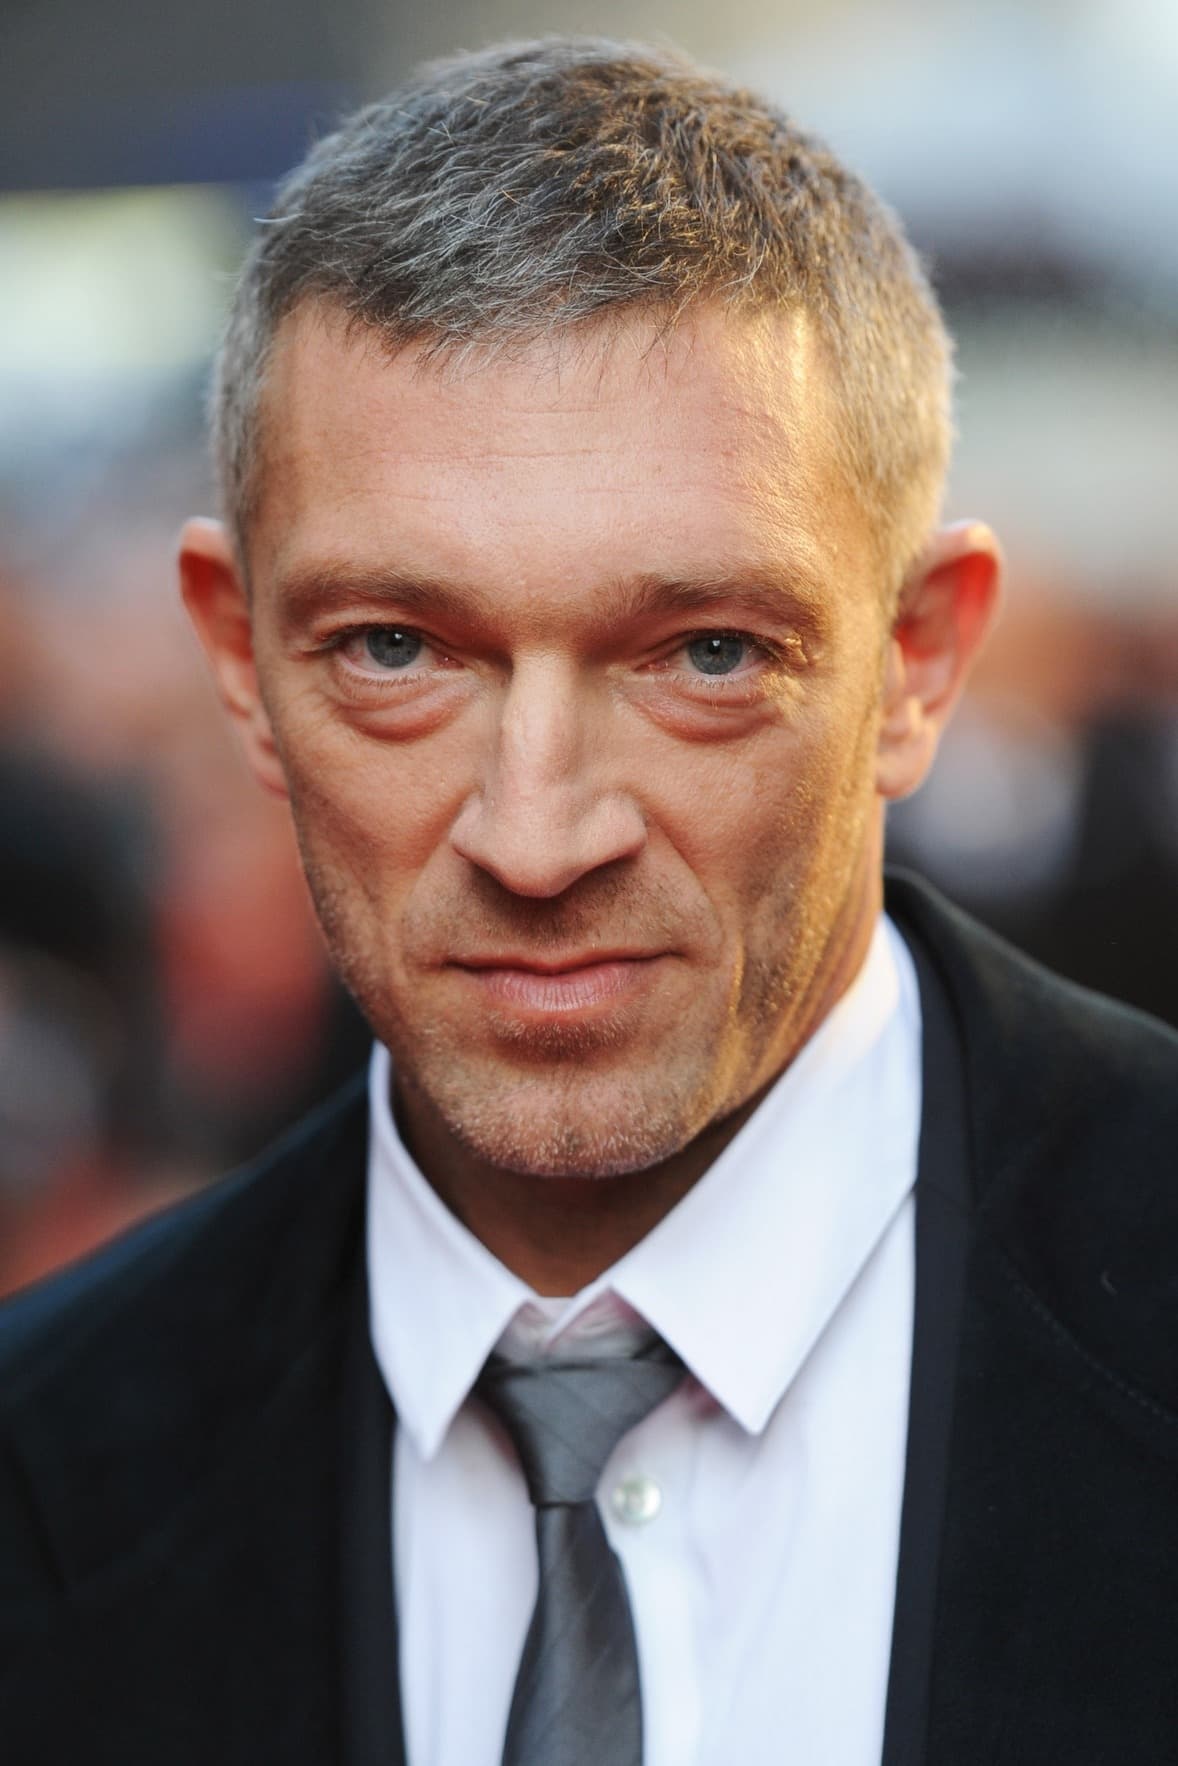 Vincent Cassel | Mike Blueberry